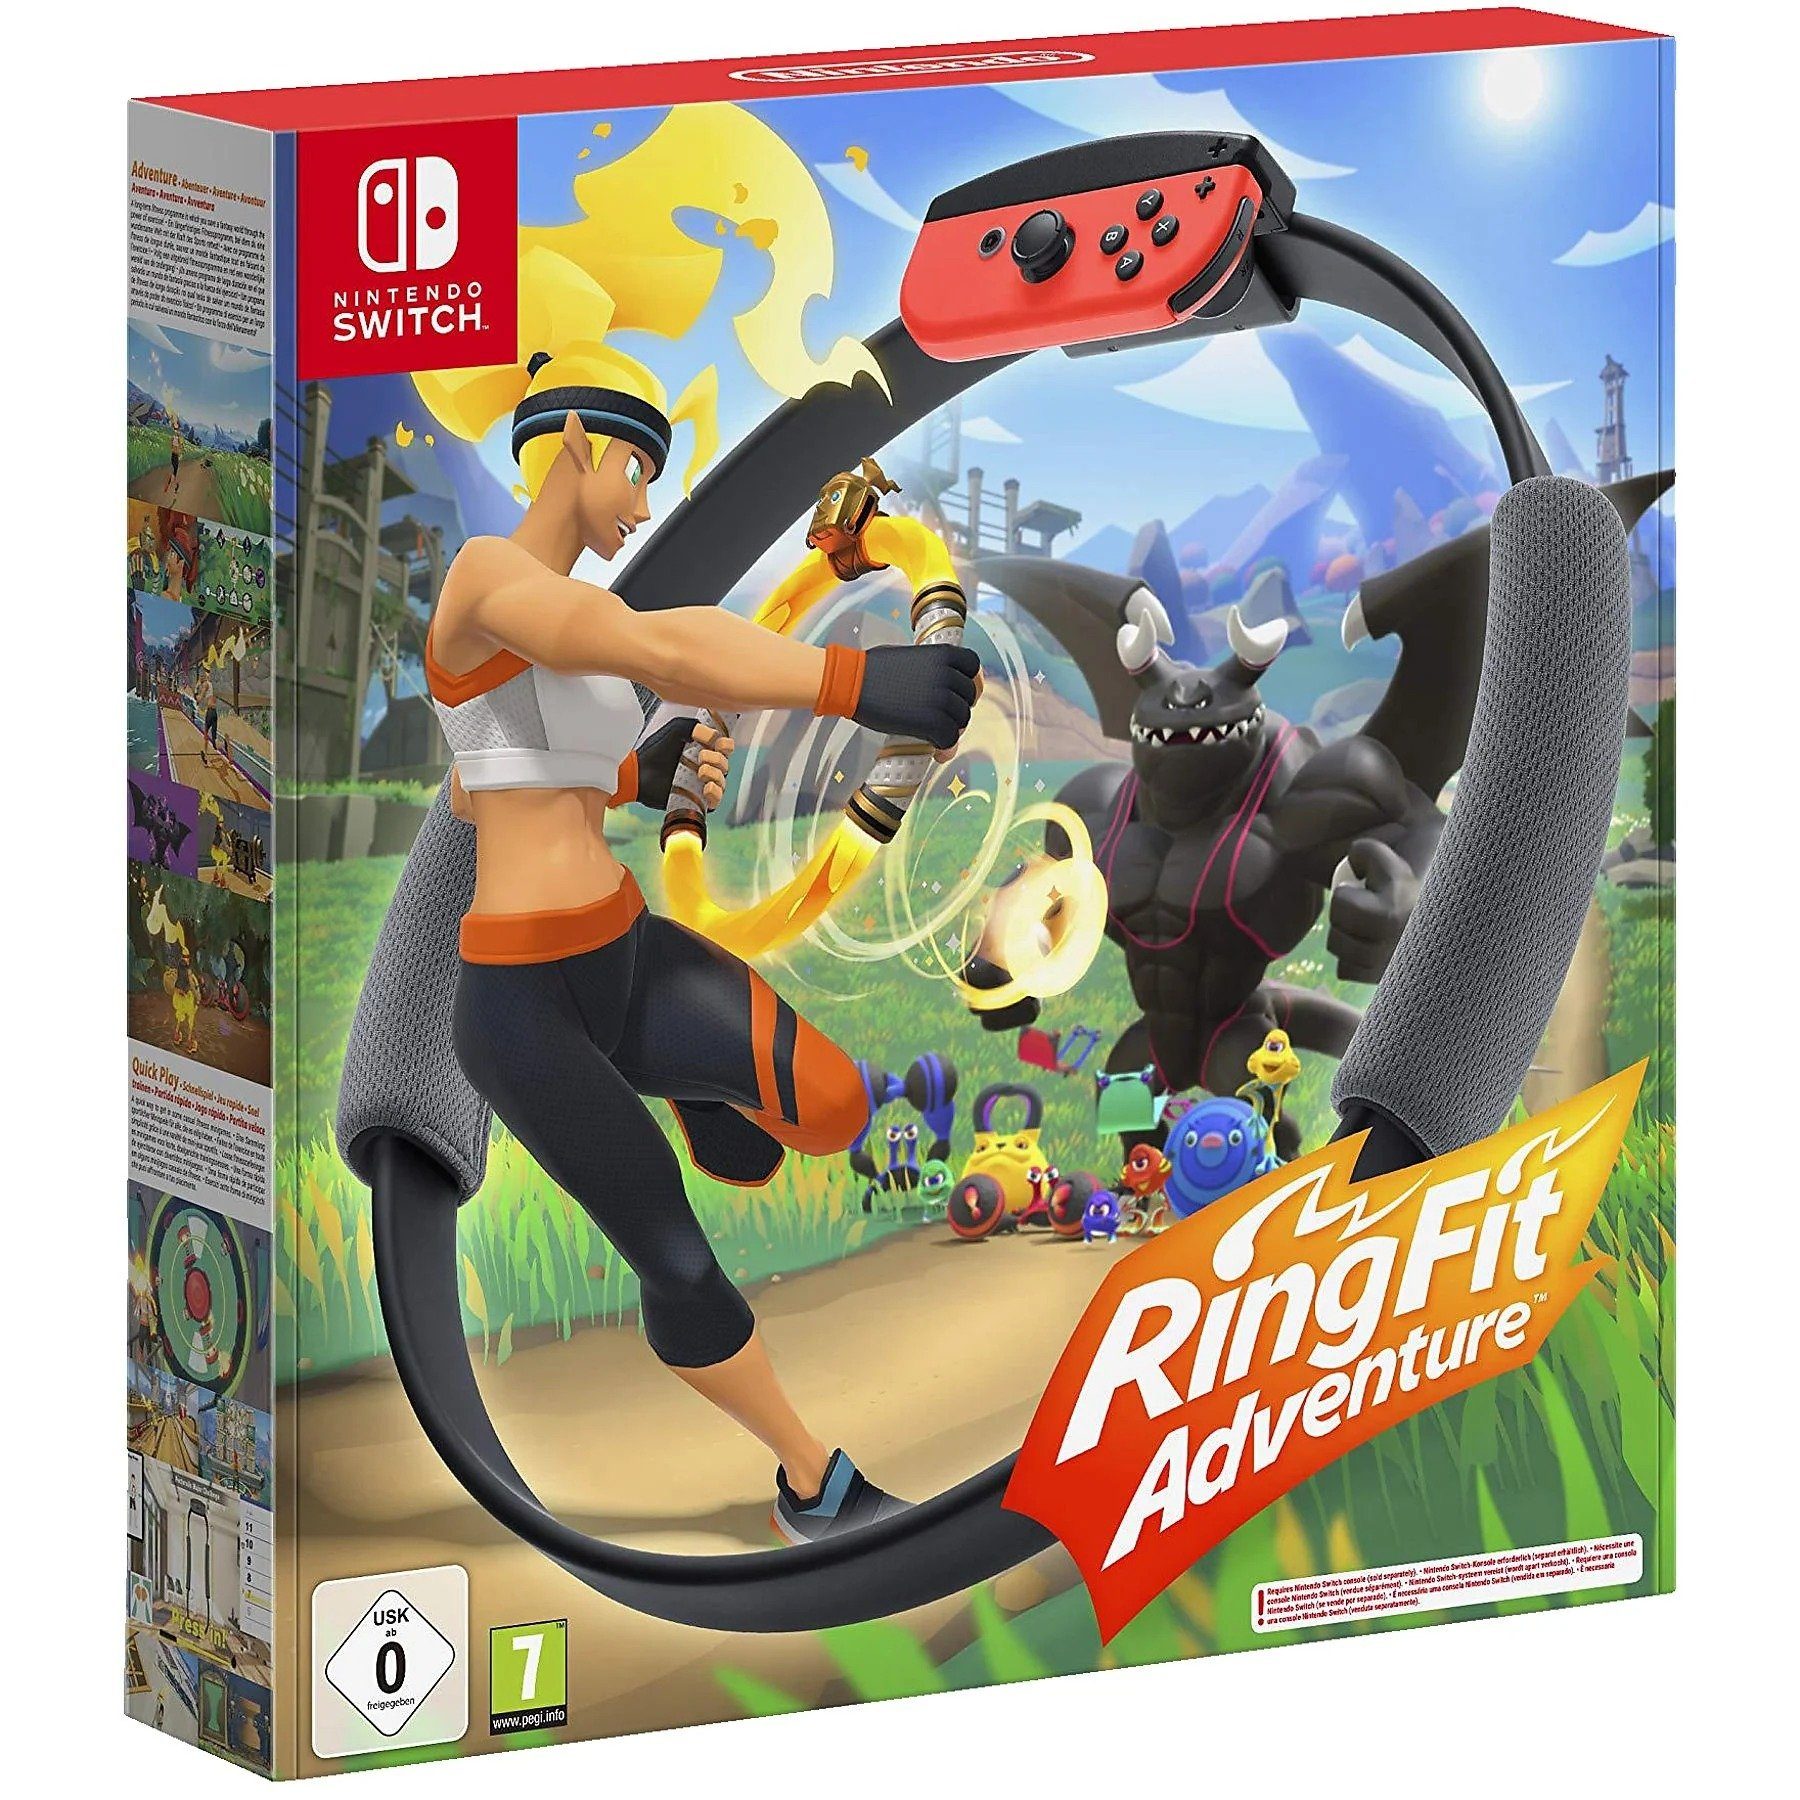 Switch-Controller Switch Ring-Con Adventure Spiel. inkl. Fit Nintendo & Beingurt Ring